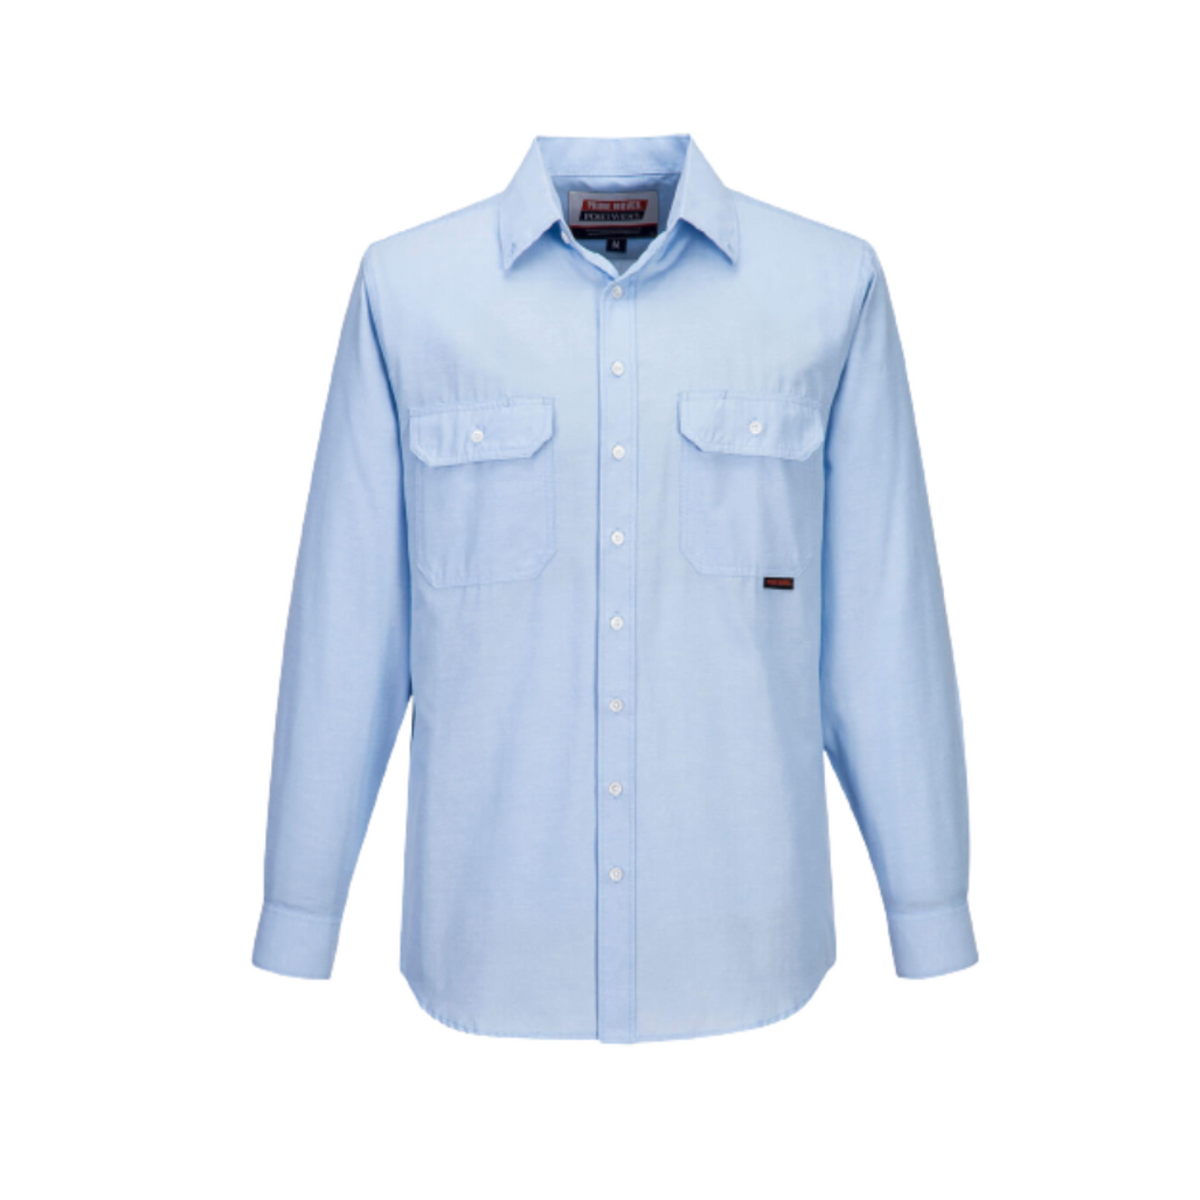 Portwest Sydney Shirt, Long Sleeve, Light Weight Poly Cotton Button Shirt MS868-Collins Clothing Co